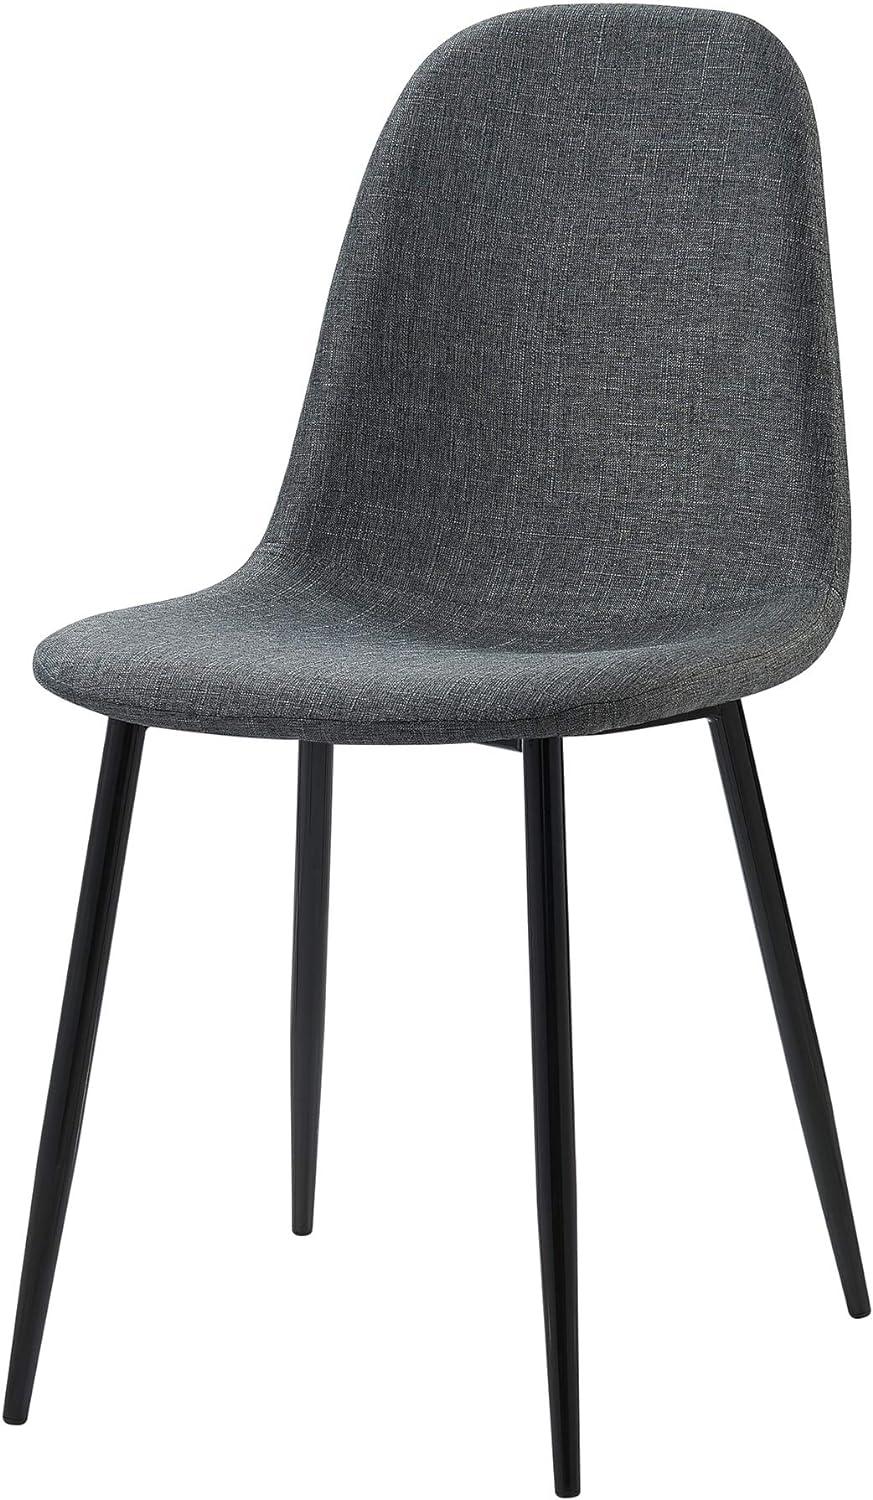 Minimalista Dark Gray Upholstered Dining Chair with Black Metal Legs, Set of 2